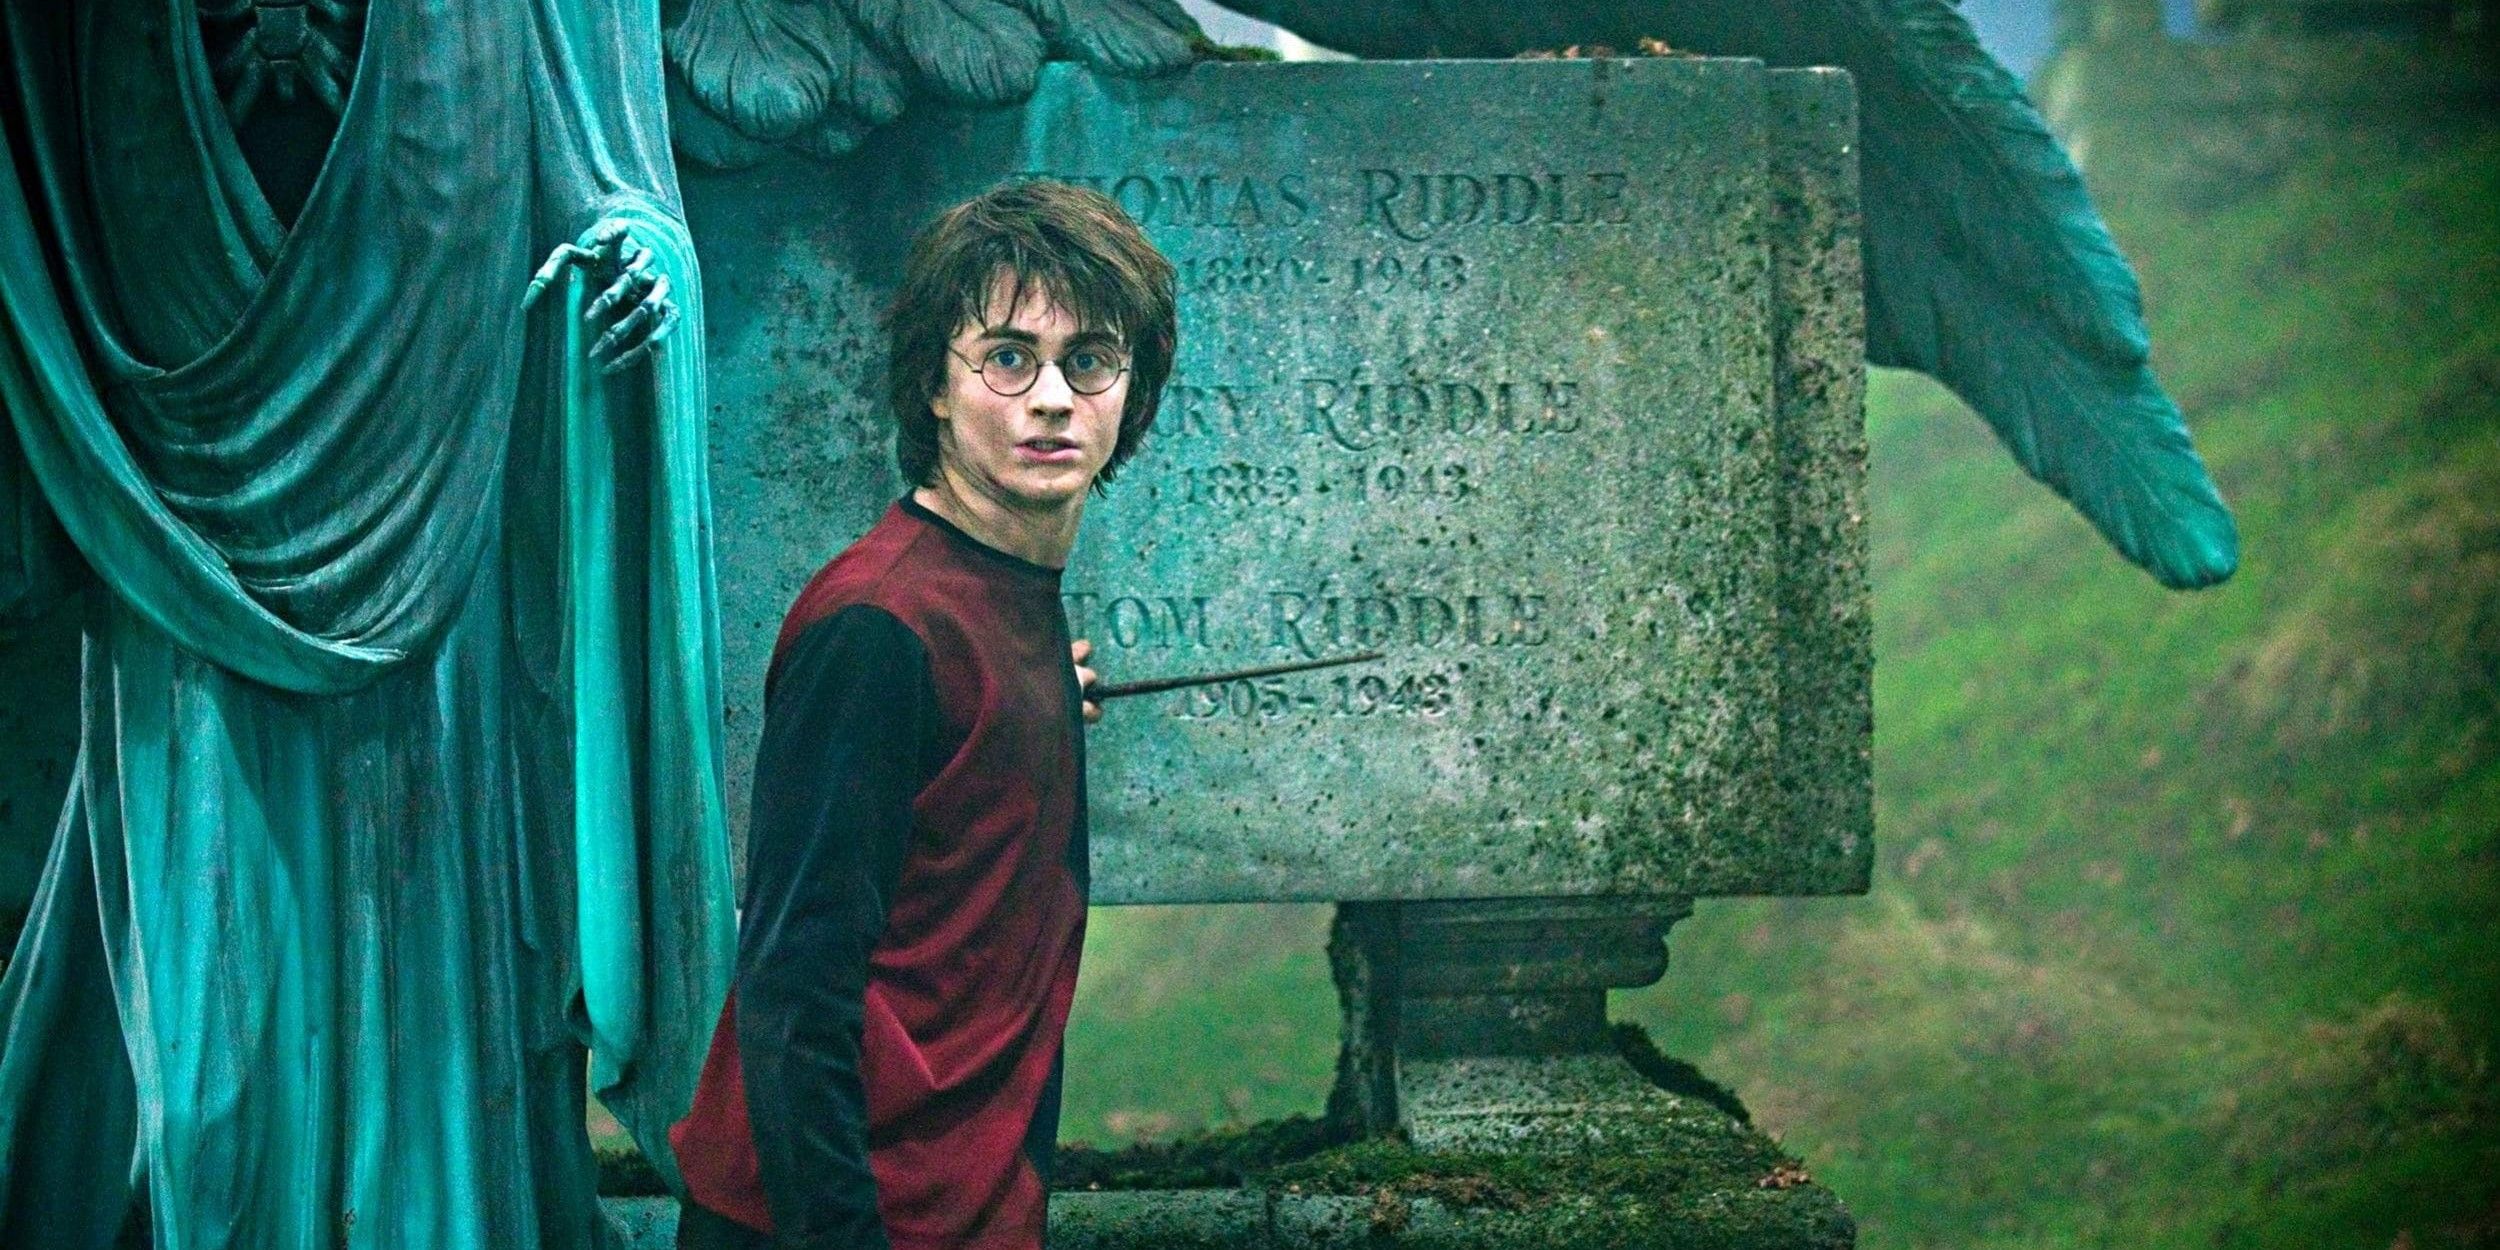 Harry Potter at the Riddle family grave